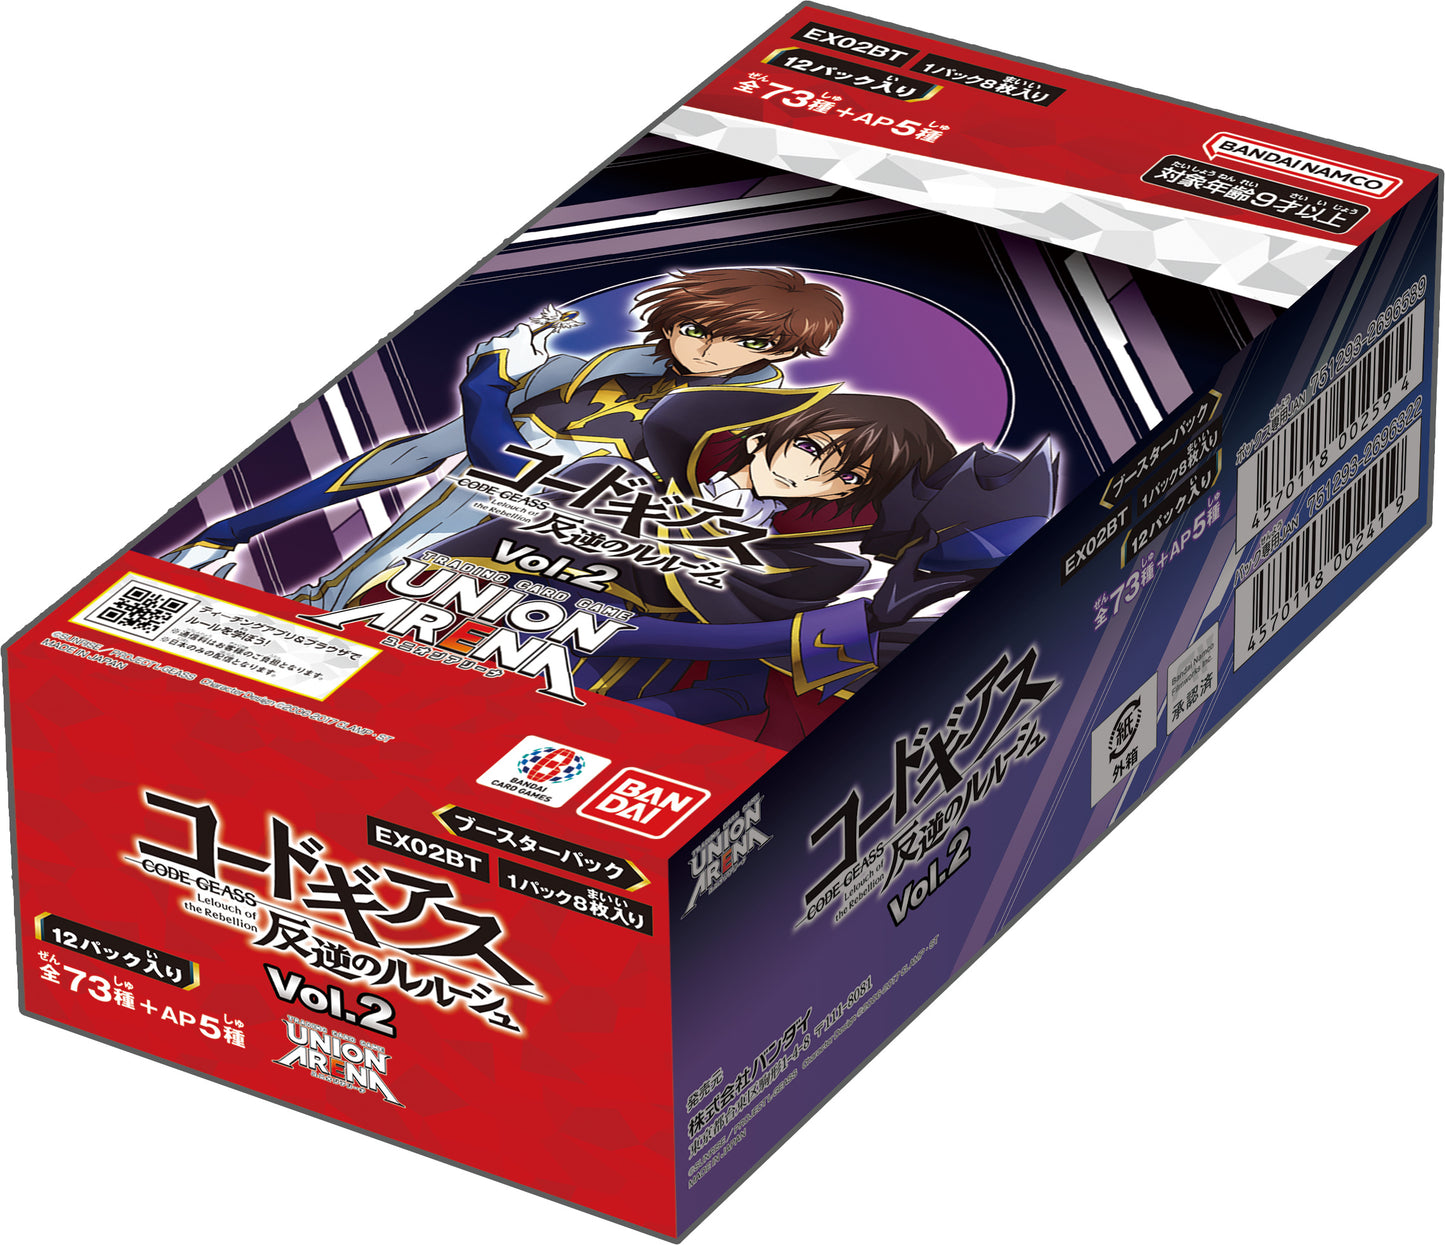 Union Arena TCG - Code Geass: Lelouch of the Rebellion EX02BT (Japanese) Booster Box